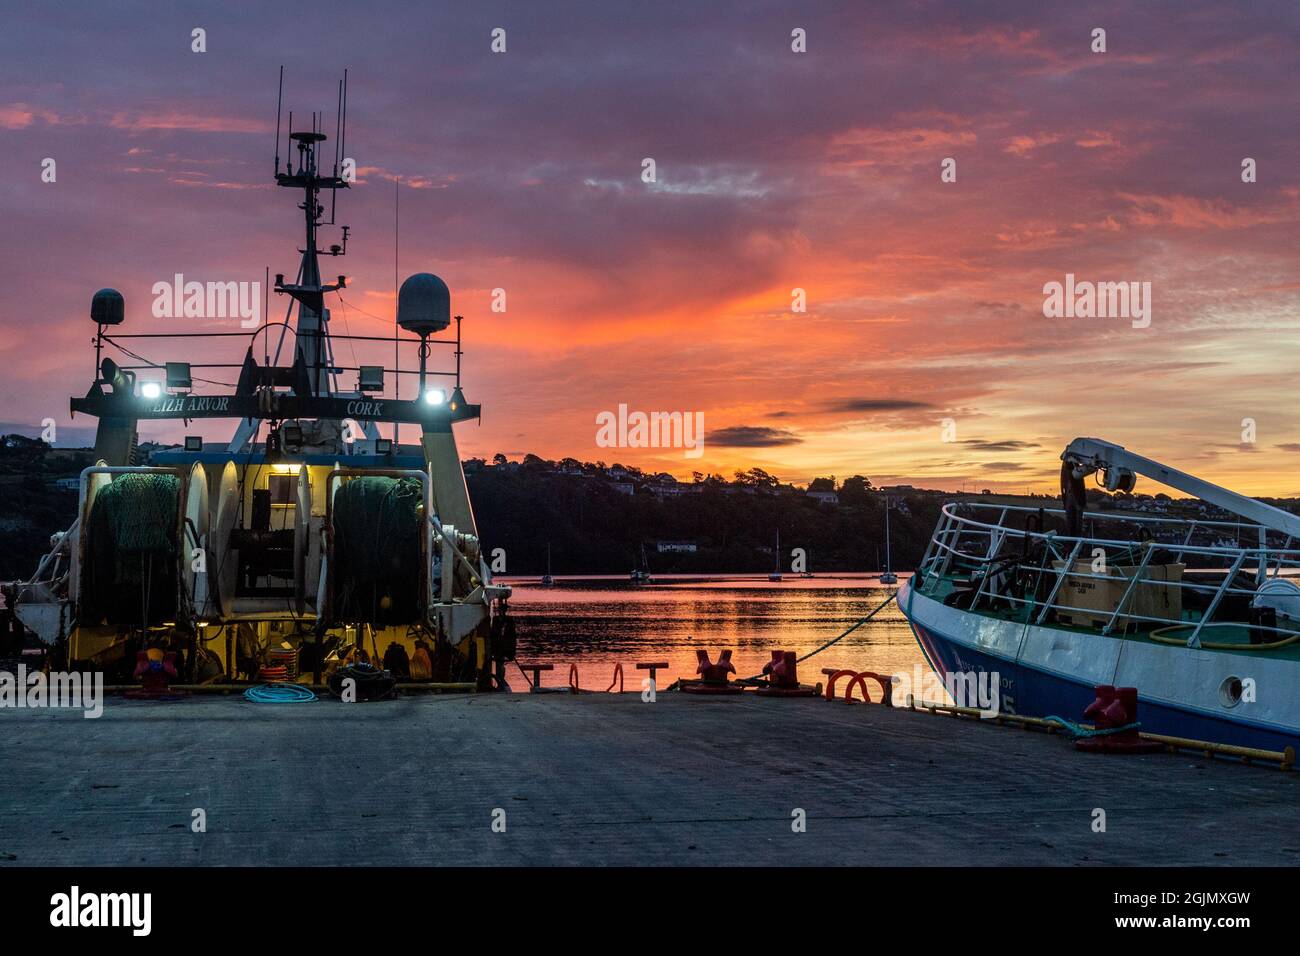 Kinsale, West Cork, Ireland. 11th Sep, 2021. The sun rises over Kinsale on the 20th anniversary of the 9/11 terrorist attacks in America. During the attacks, 2,977 people were killed in the deadliest terrorist attacks in world history. Credit: AG News/Alamy Live News Stock Photo